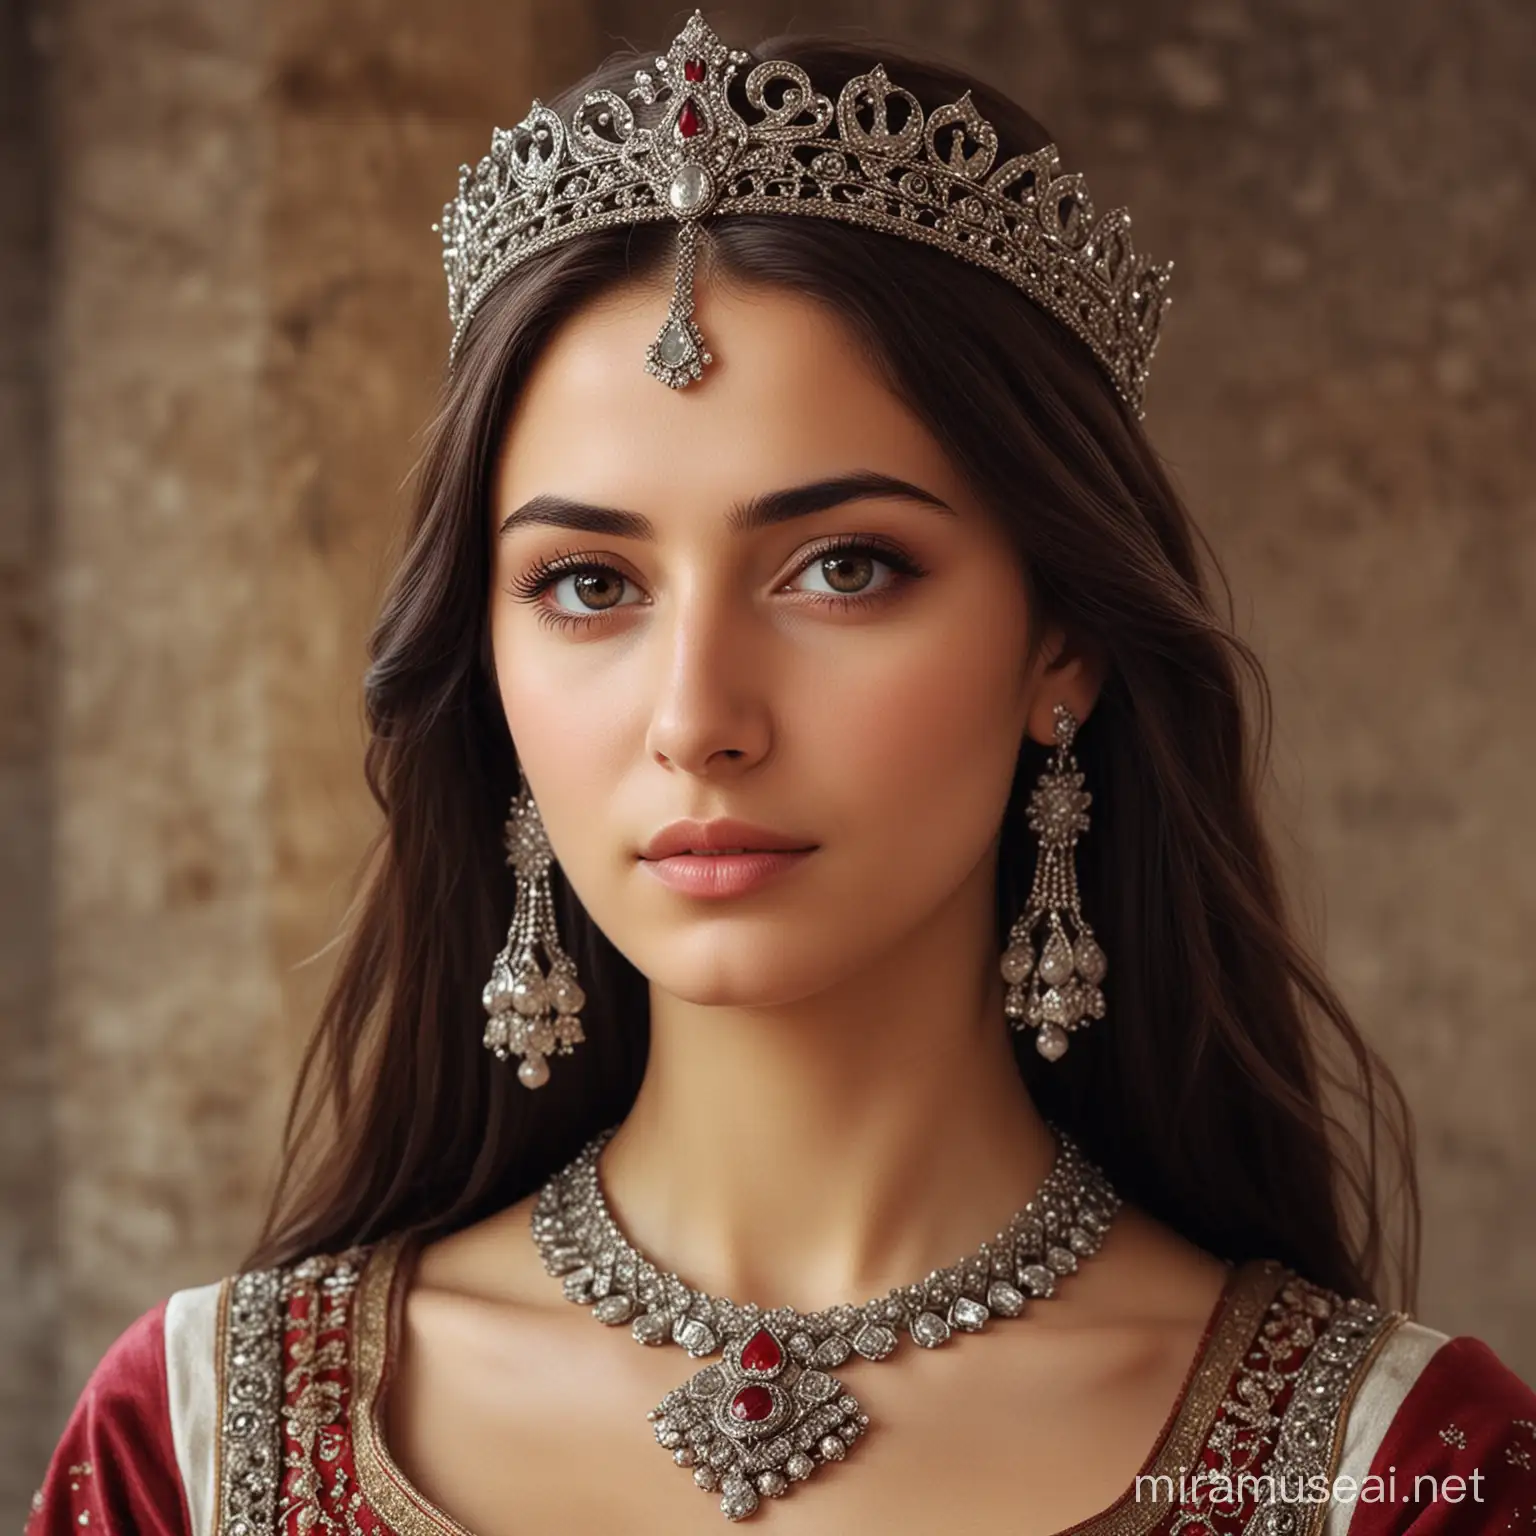 generate Nestani, She is very beautiful, she is princes from 12th century Georgia. she is thinking about her boyfriend